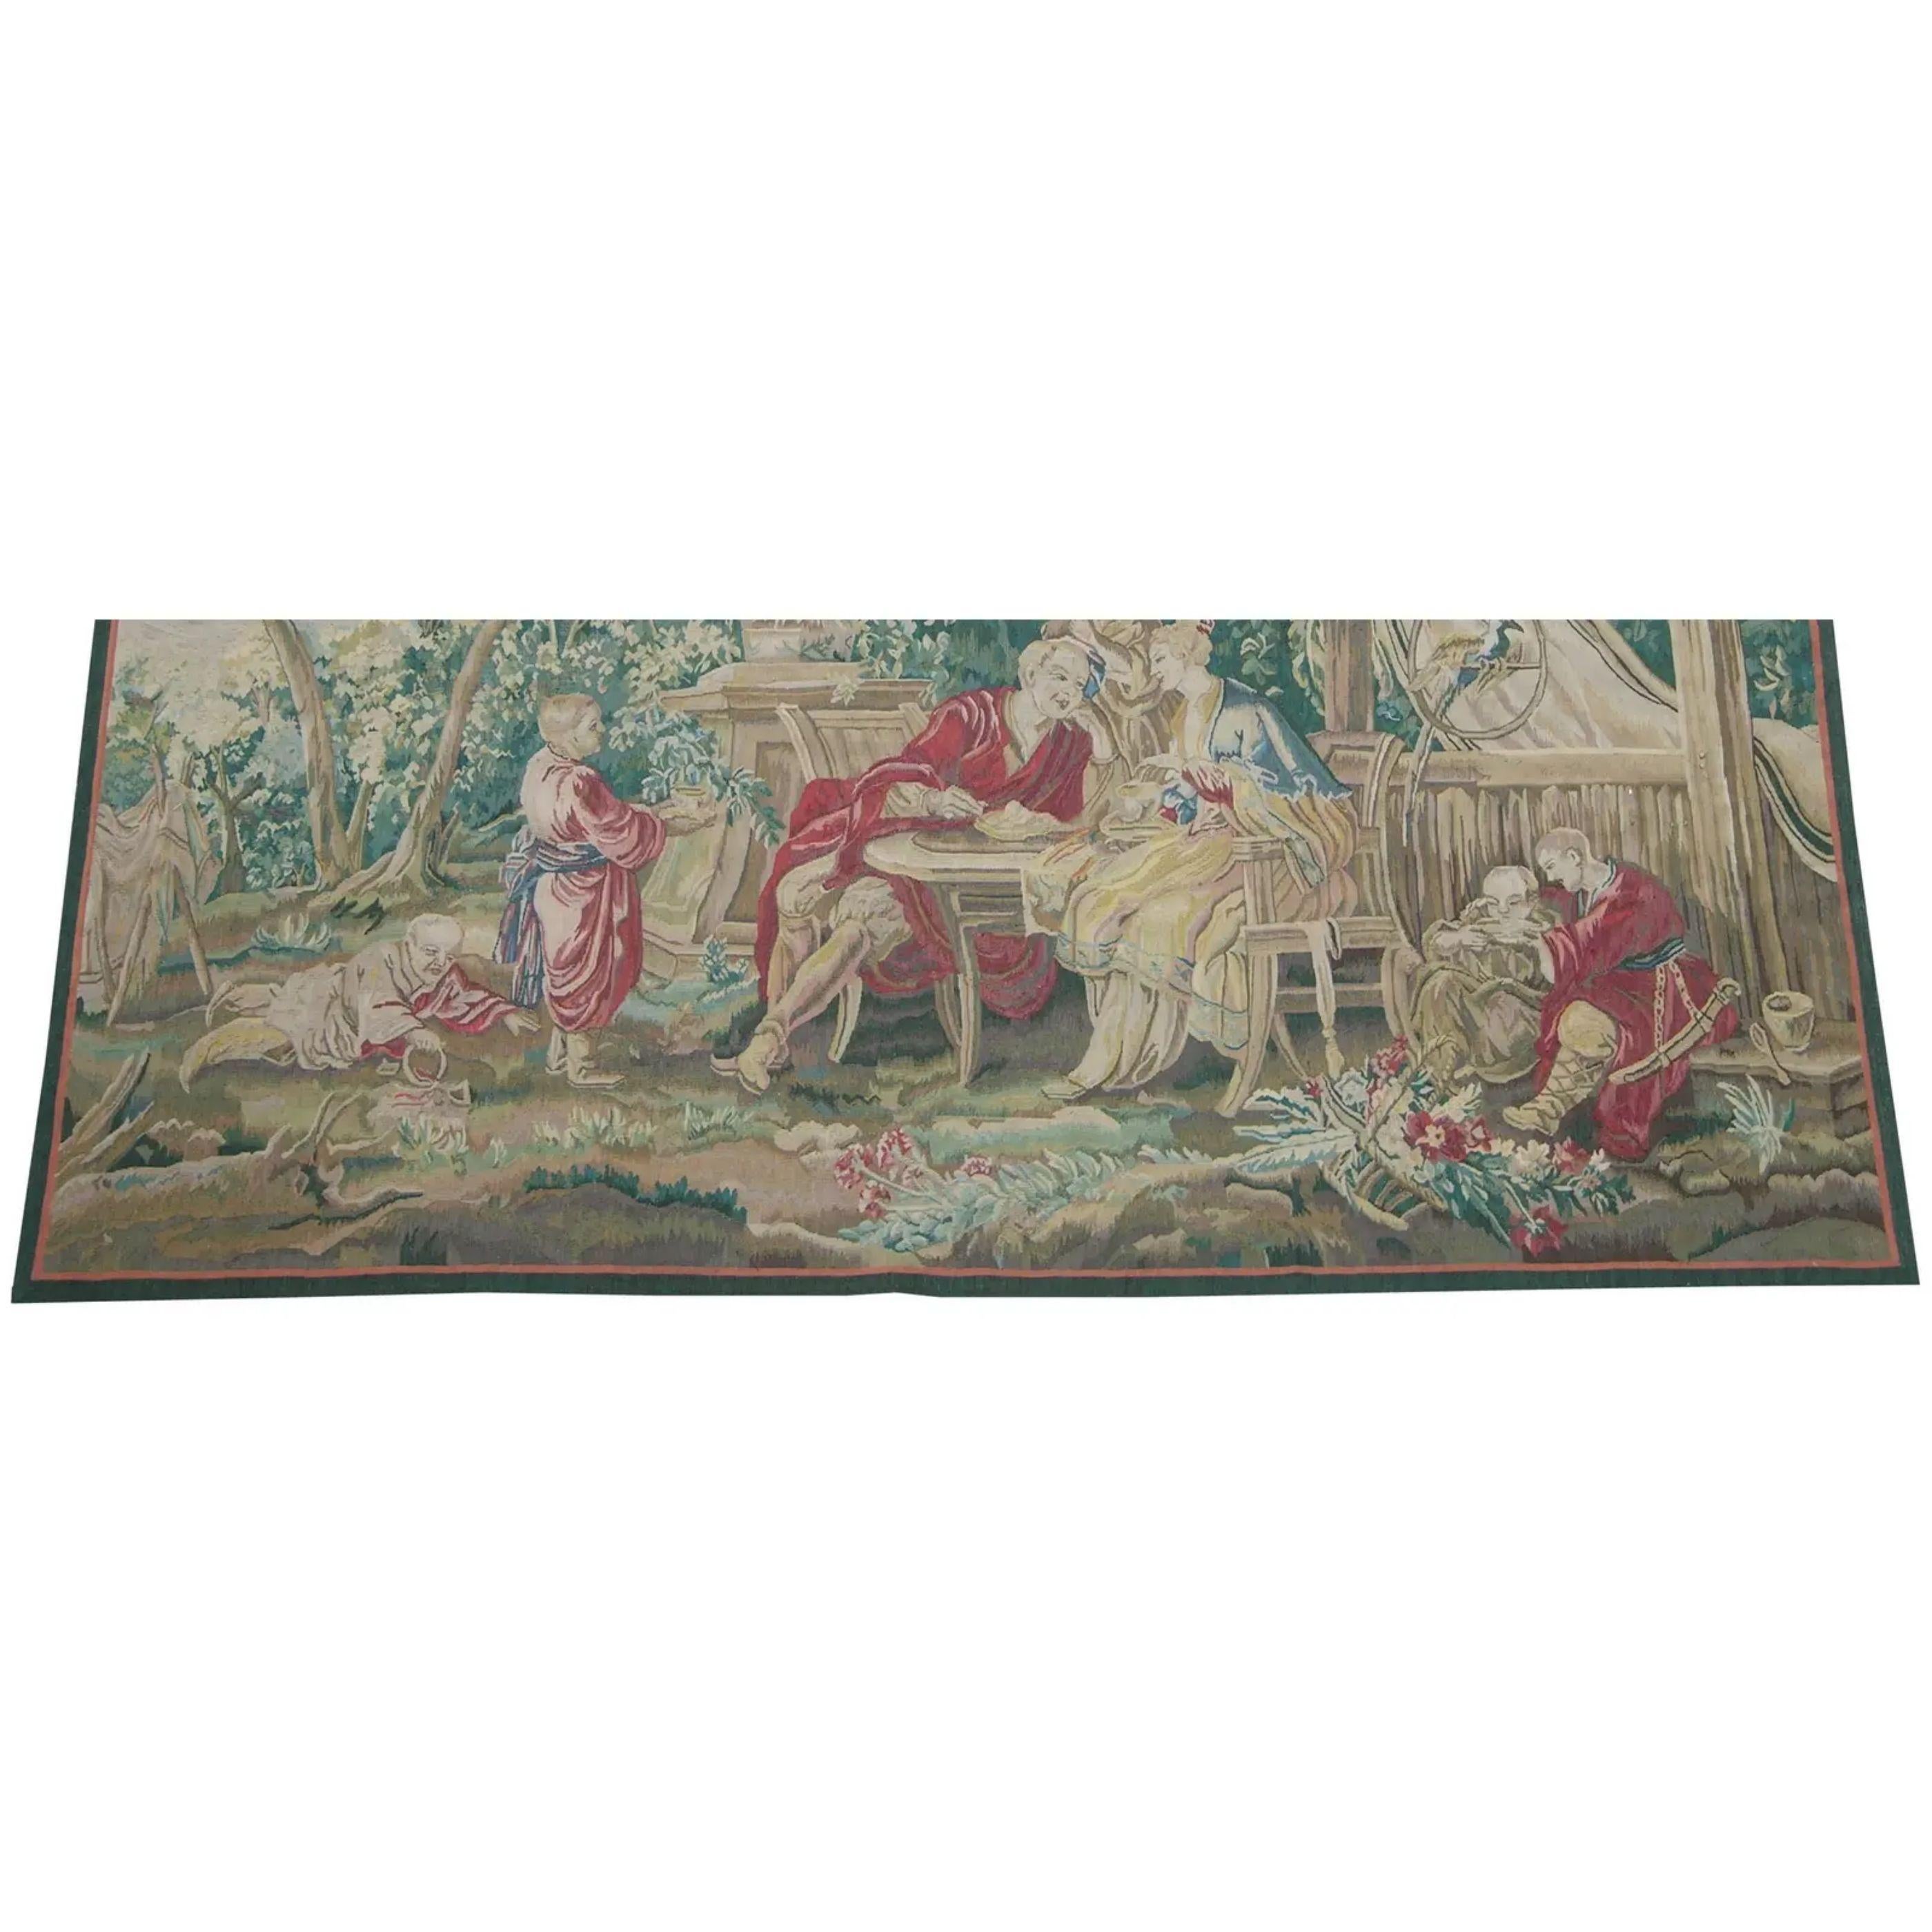 Unknown Vintage Tapestry Depicting Royalty 7.2X5.4 For Sale